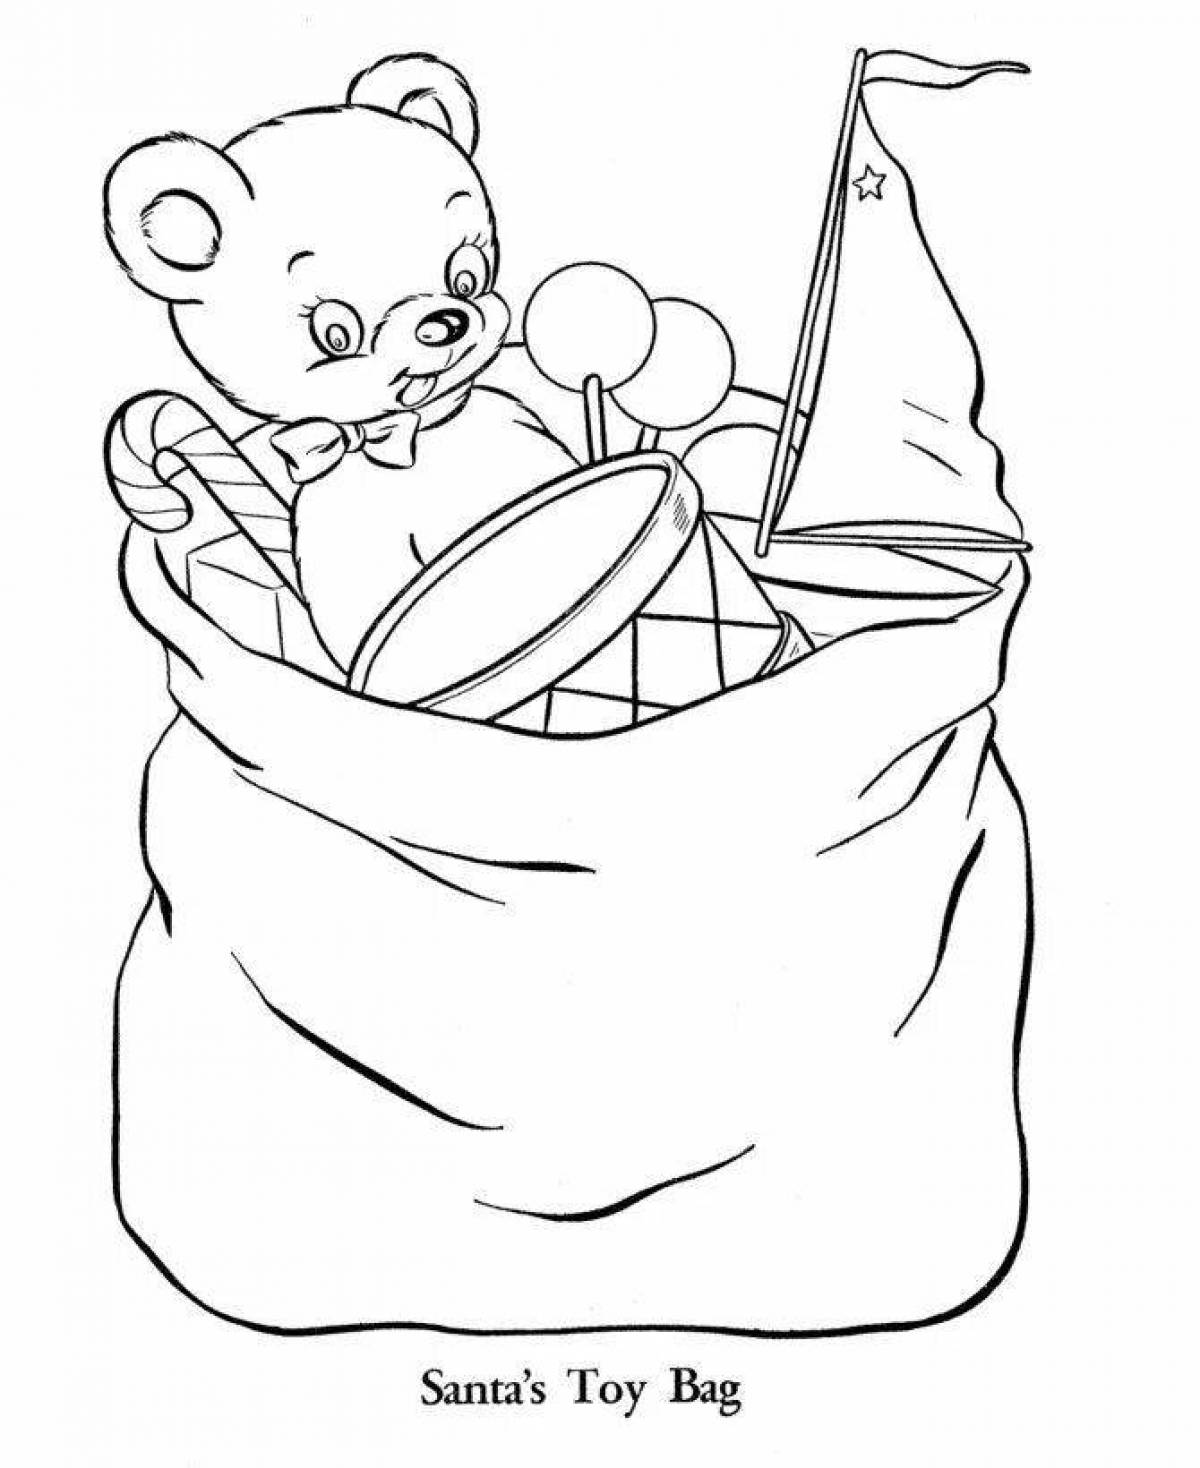 Coloring page holiday bag with gifts